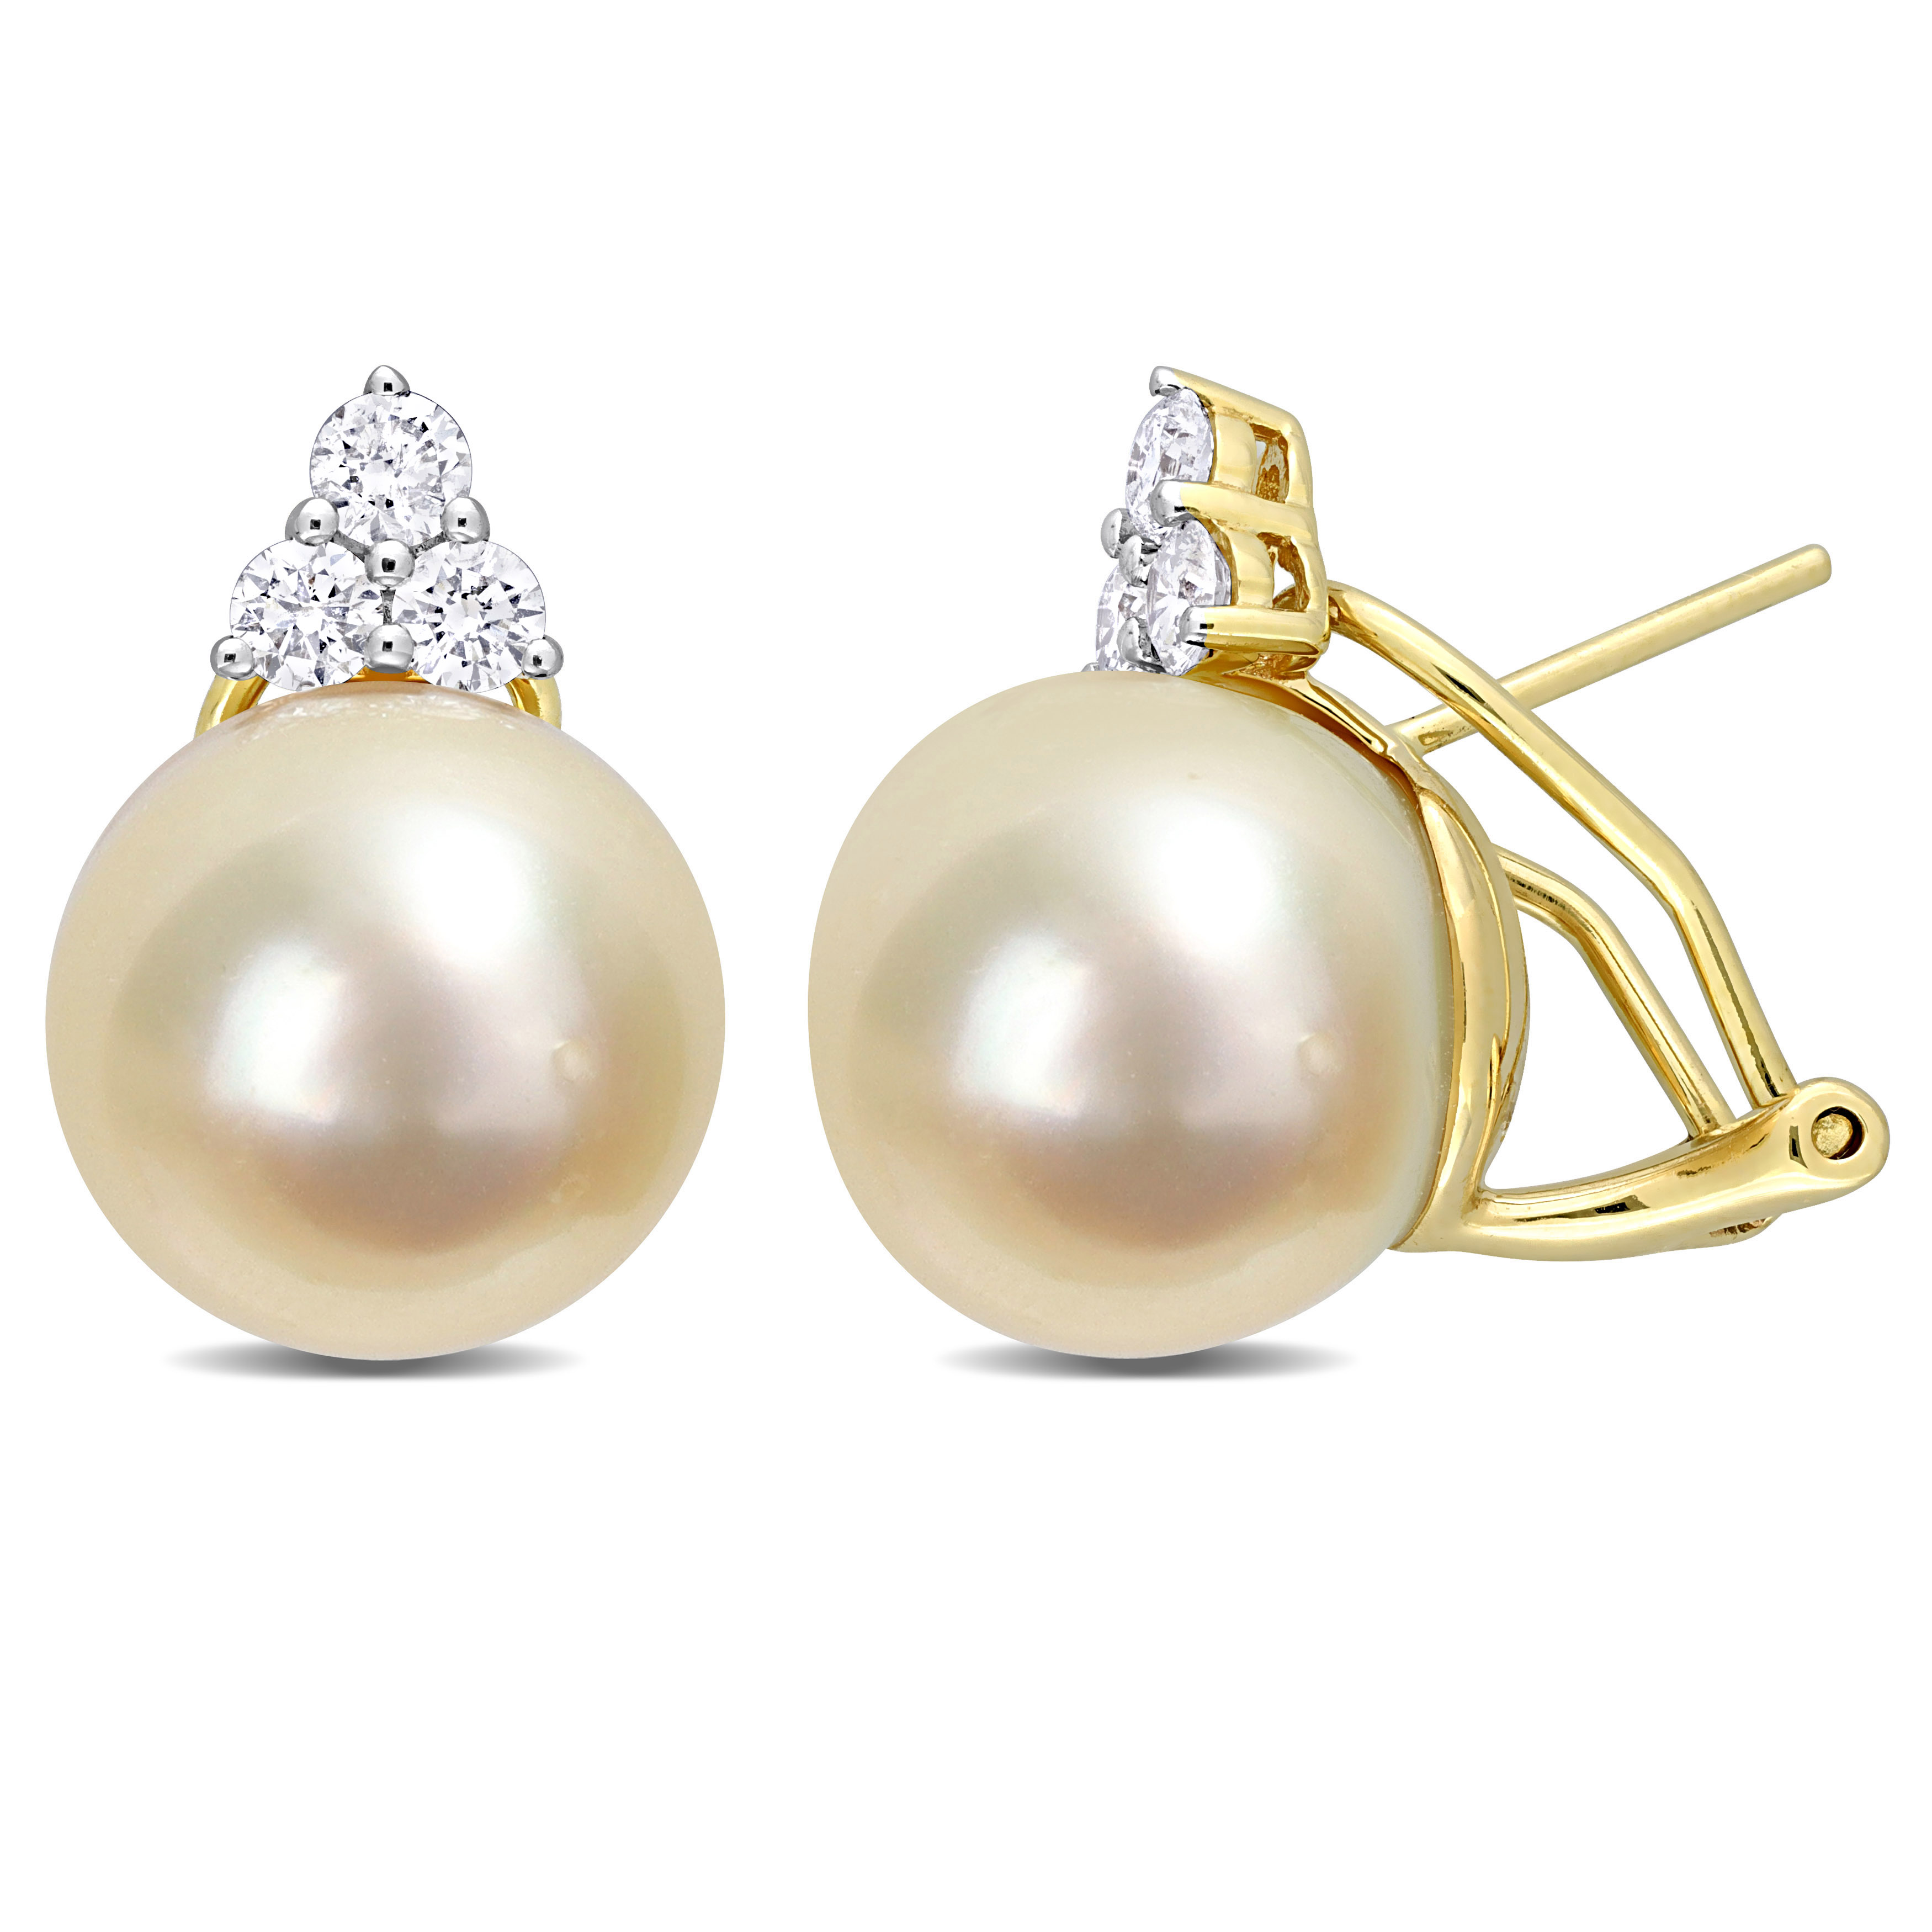 12-12.5 MM South Sea Cultured Pearl and 5/8 CT TW Diamond Clip-Back Earrings in 14k Yellow Gold